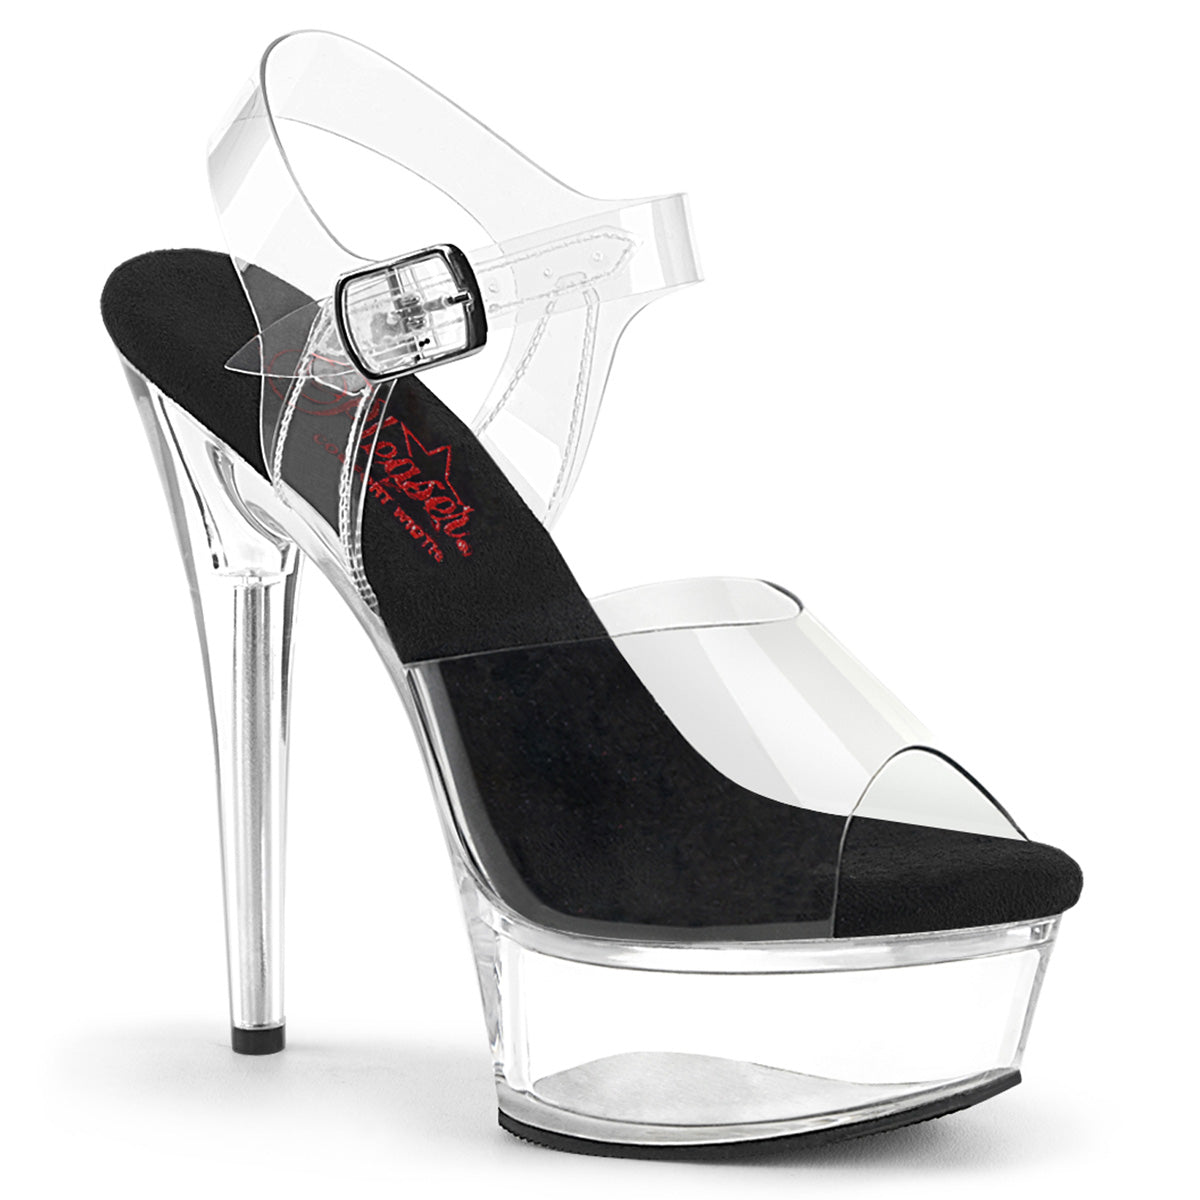 6 Inch Heel EXCITE-608 Clear Black Clear